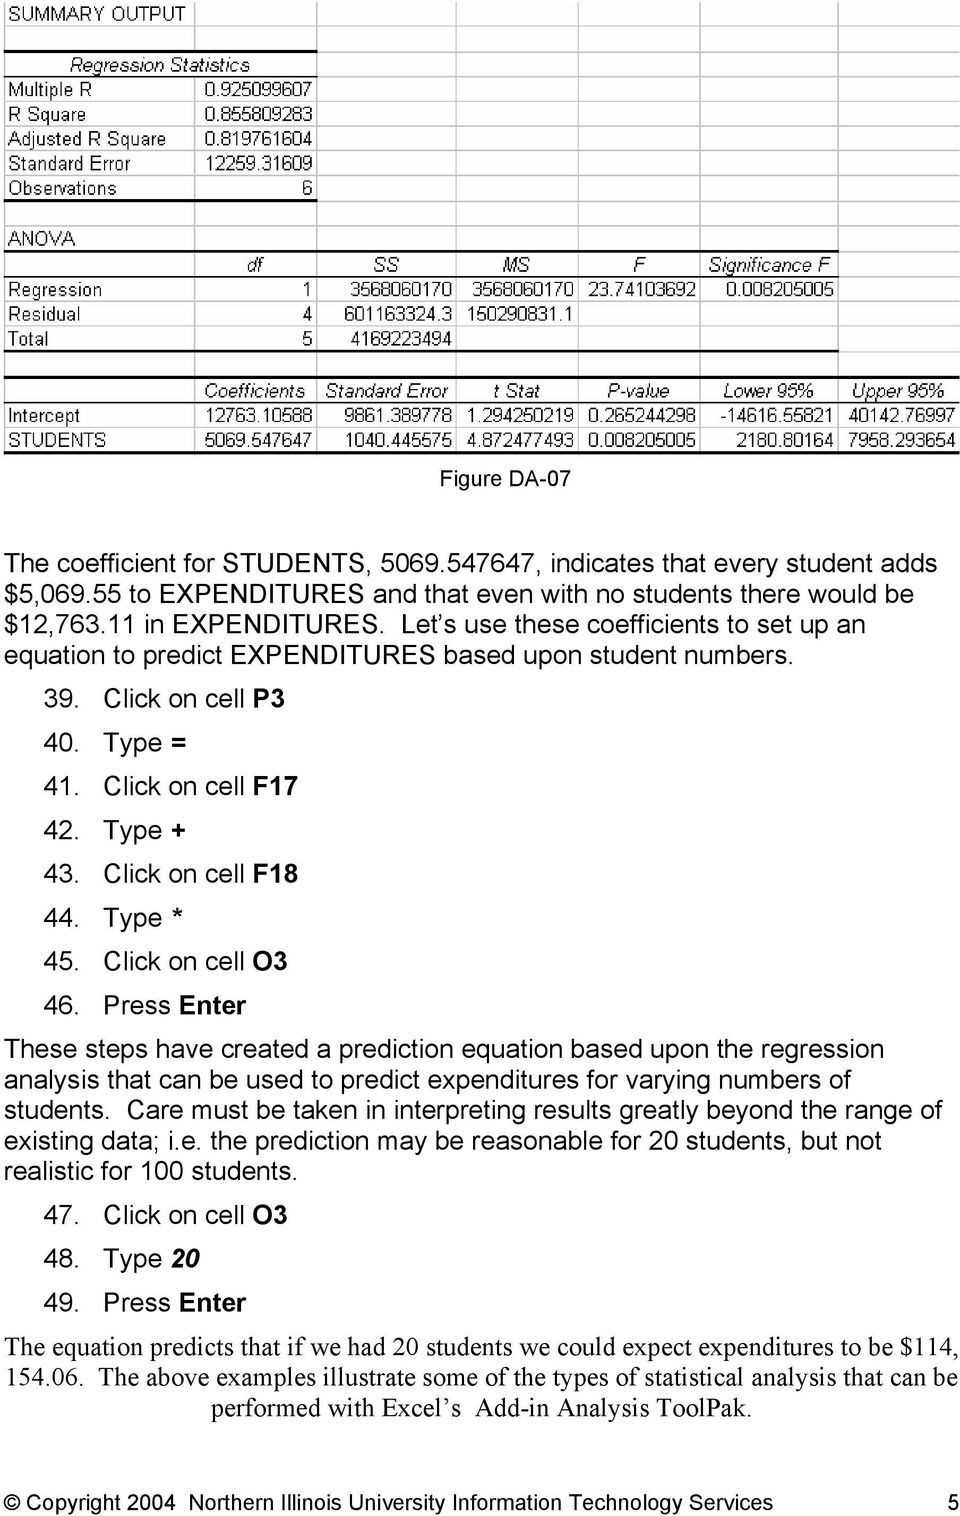 Type * 45. Click on cell O3 46. Press Enter These steps have created a prediction equation based upon the regression analysis that can be used to predict expenditures for varying numbers of students.